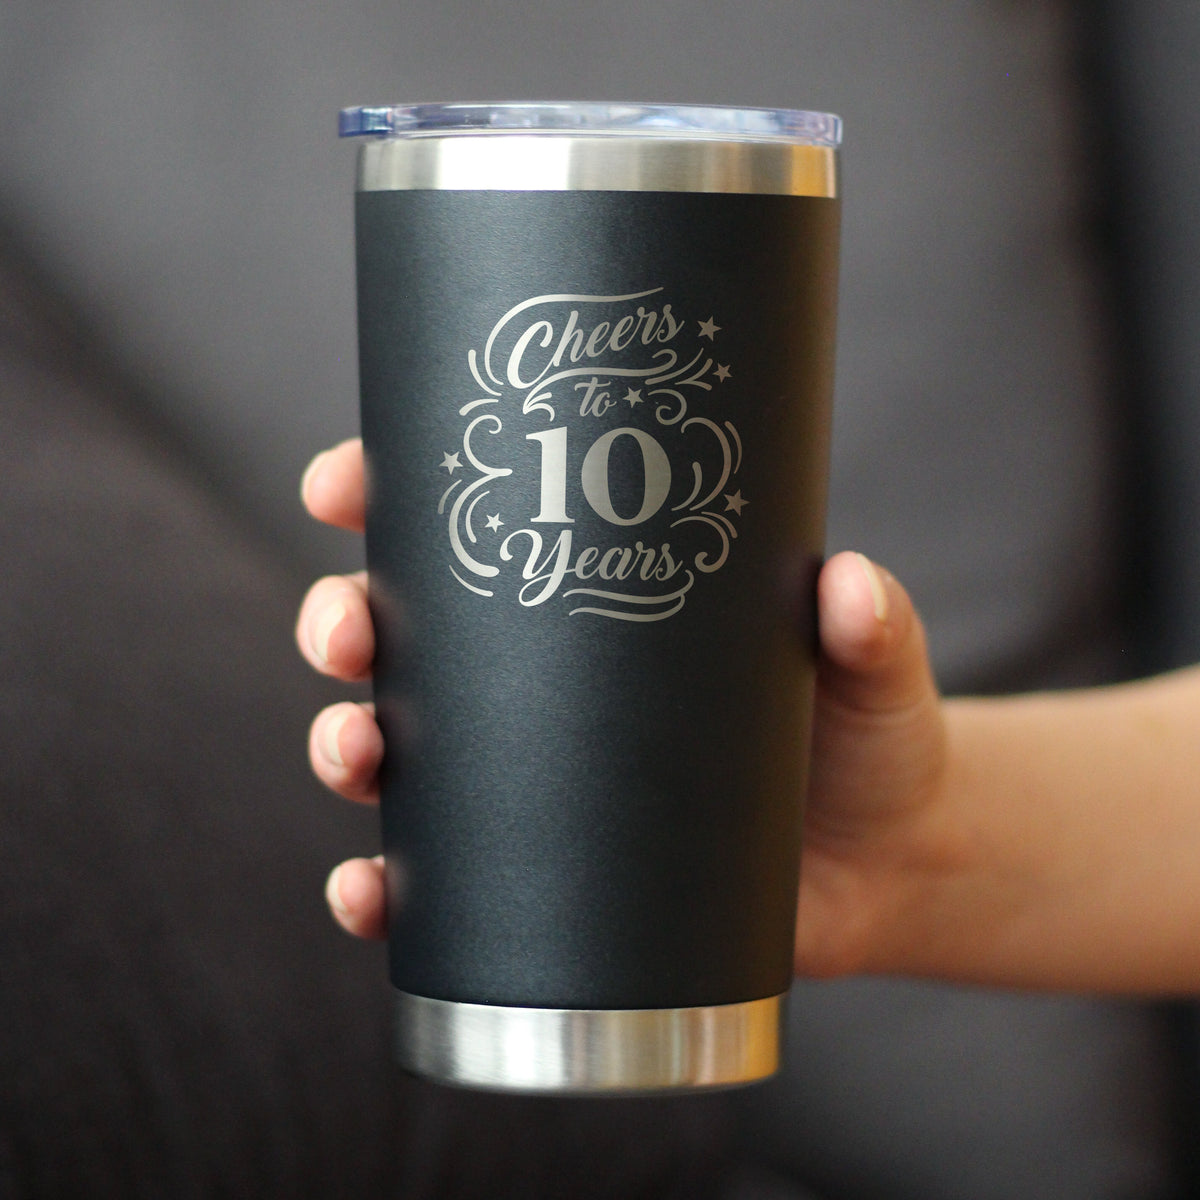 Cheers to 10 Years - Insulated Coffee Tumbler Cup with Sliding Lid - Stainless Steel Insulated Mug - 10th Anniversary Gifts and Party Decor